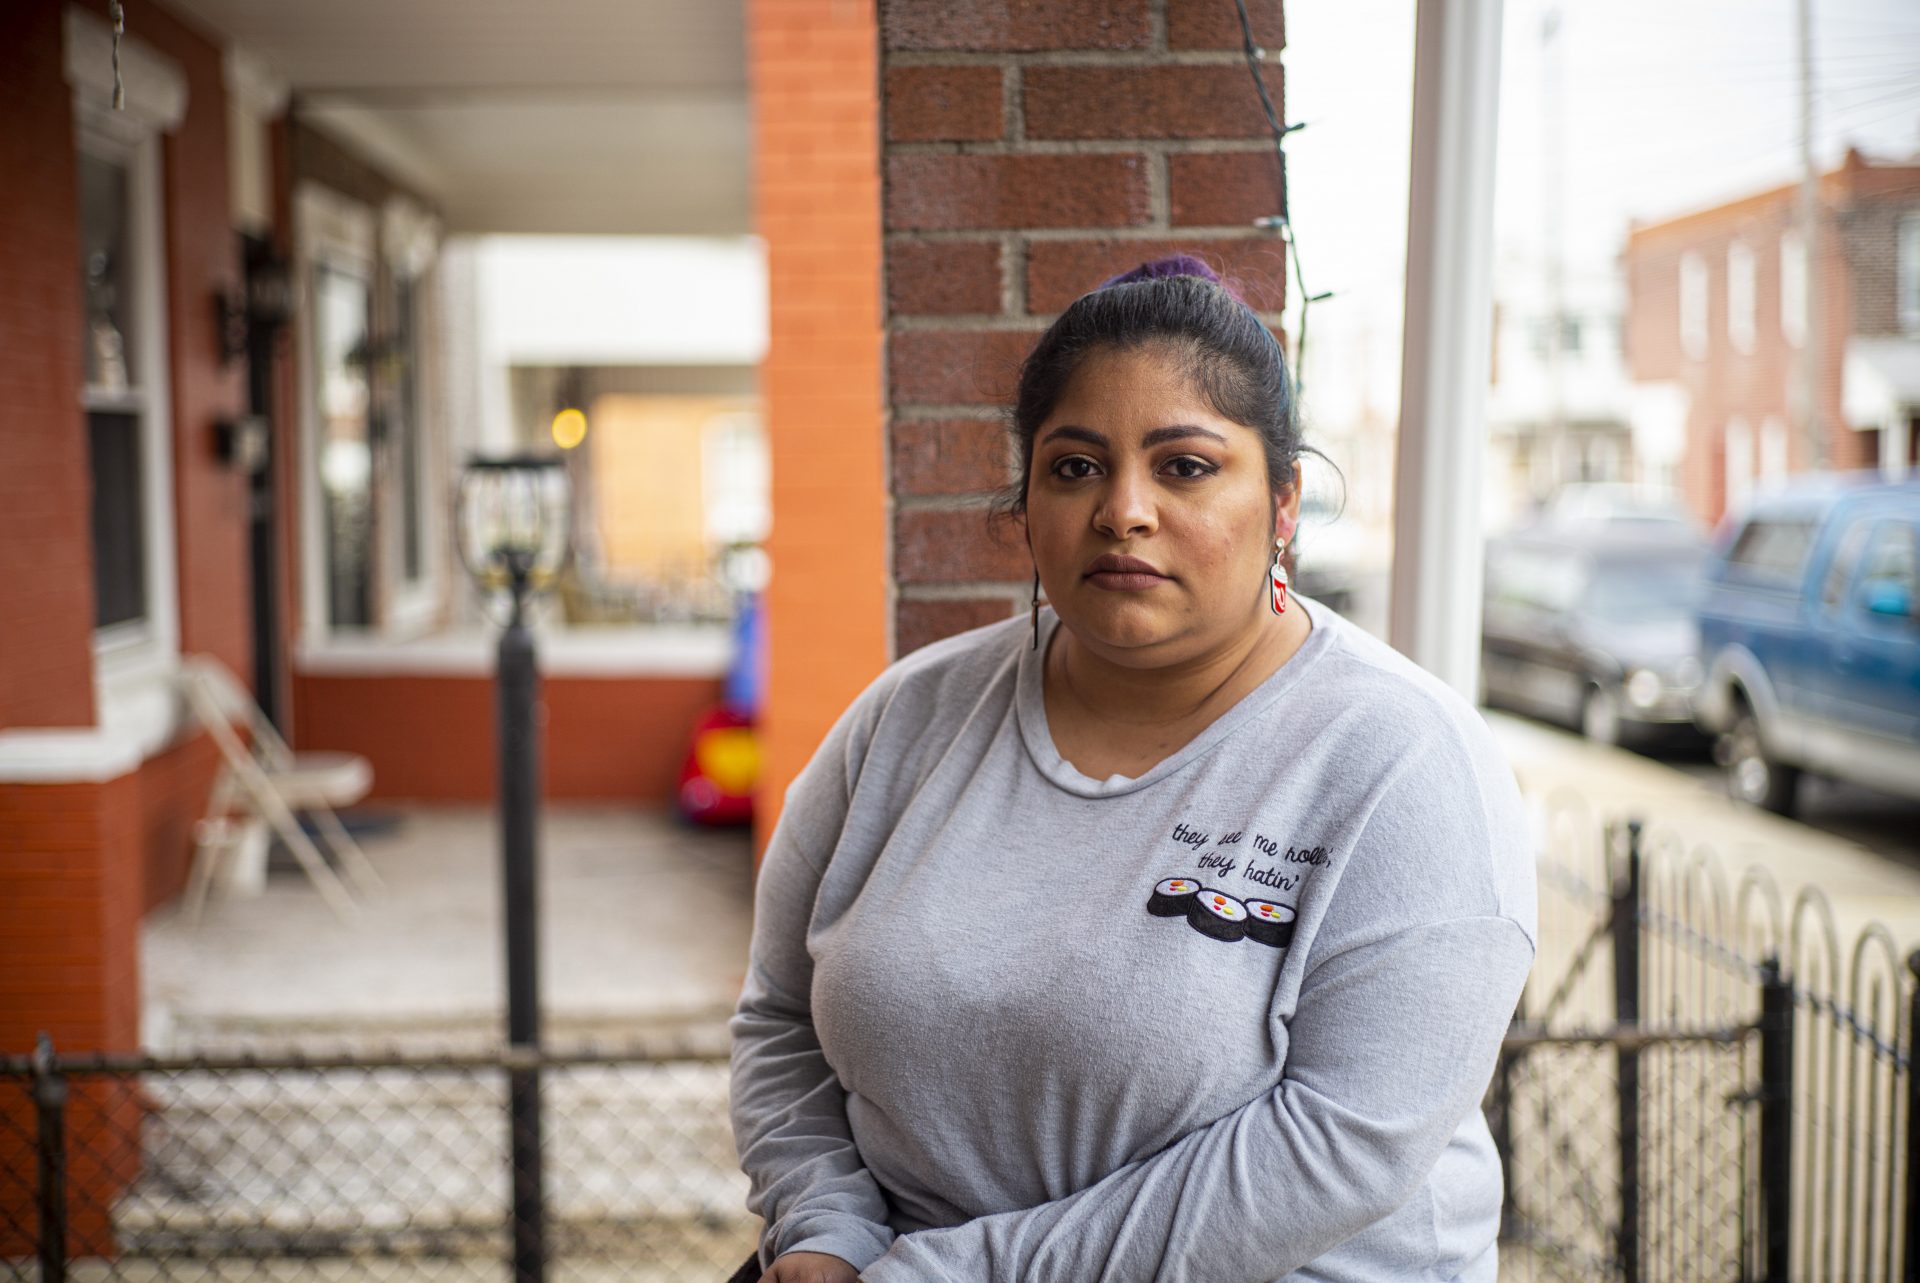 Yali Perez and her family became homeowners in Bridesburg to escape crime in other parts of the city. As Puerto Rican residents, she says things go well in the 'Burg as long as they keep to themselves.